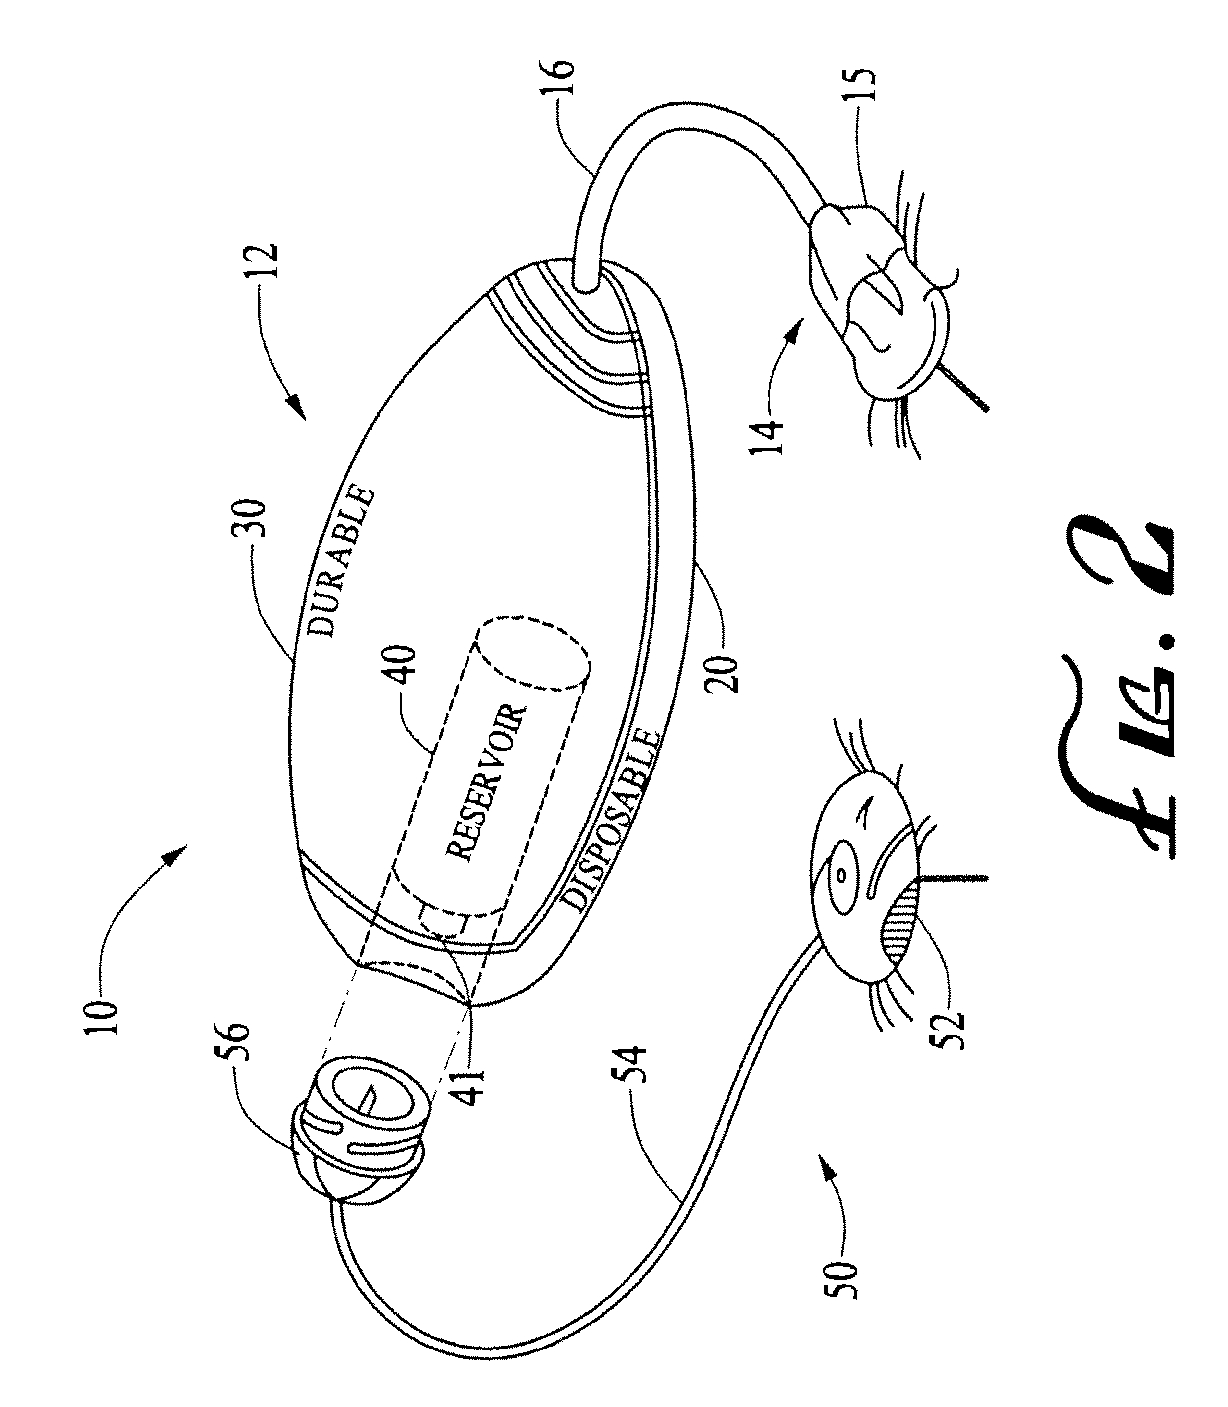 Systems and methods allowing for reservoir filling and infusion medium delivery